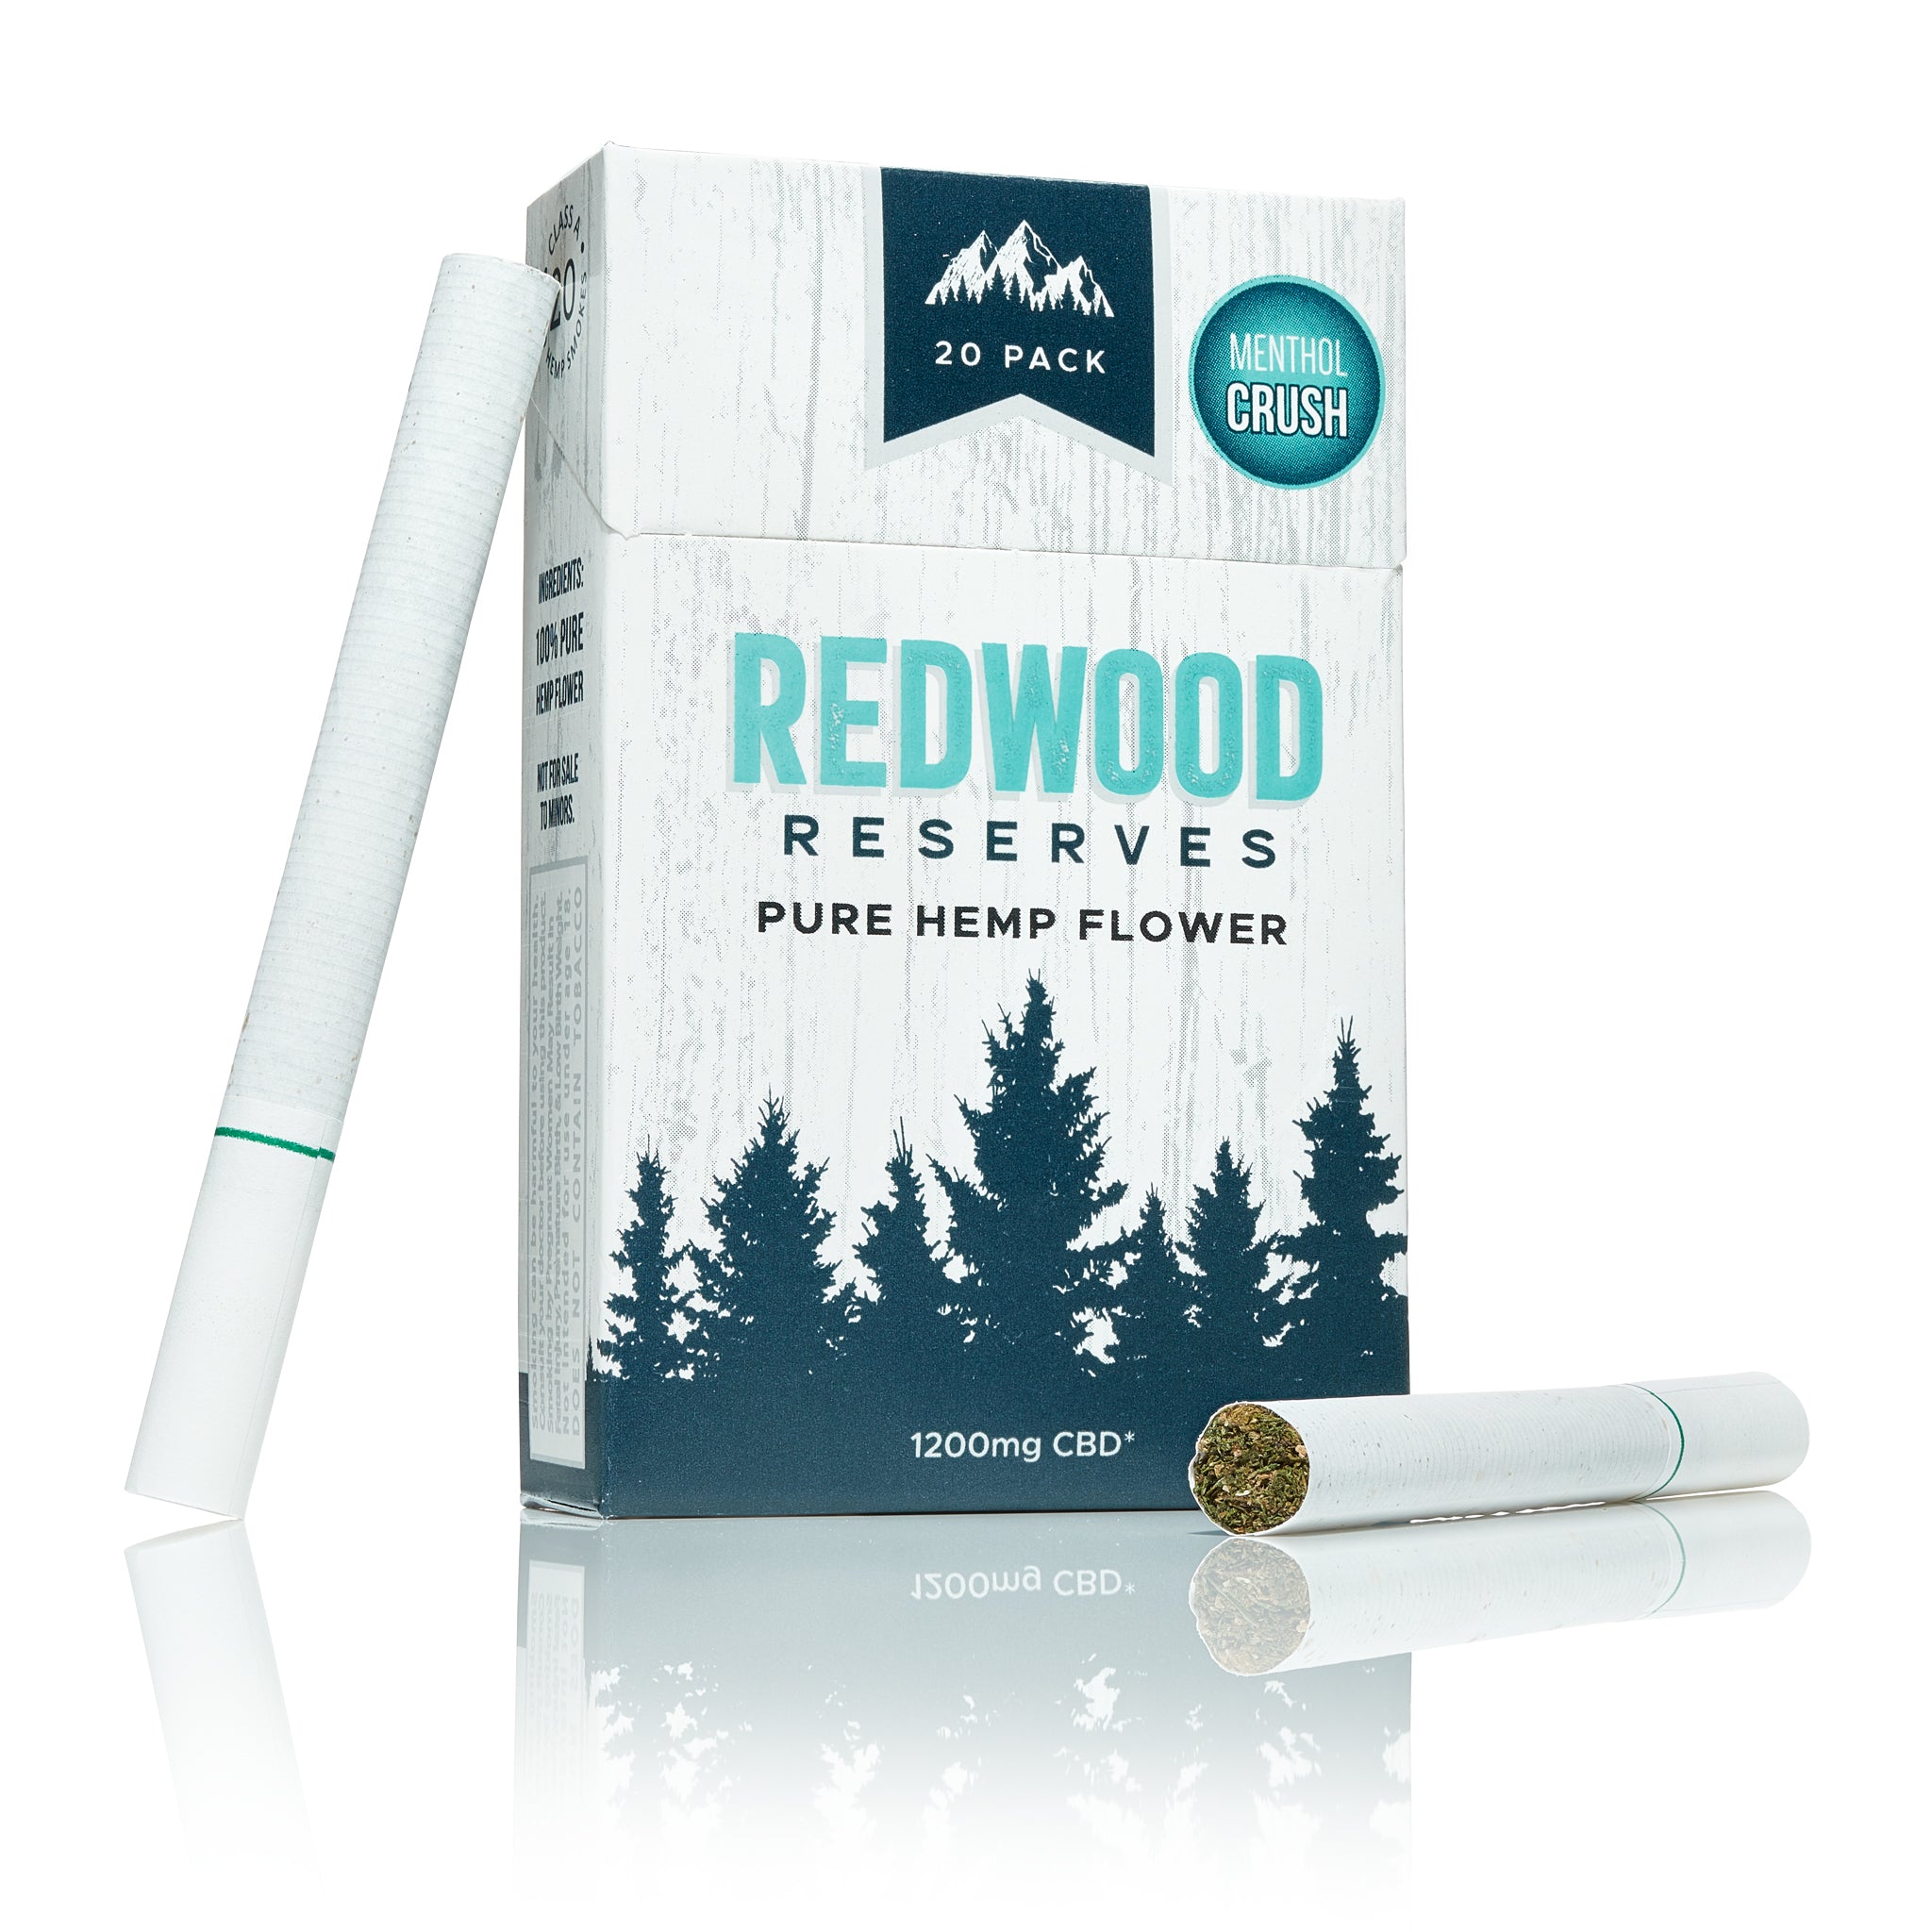 All-Natural Menthol Hemp Cigarettes with Redwood Reserves